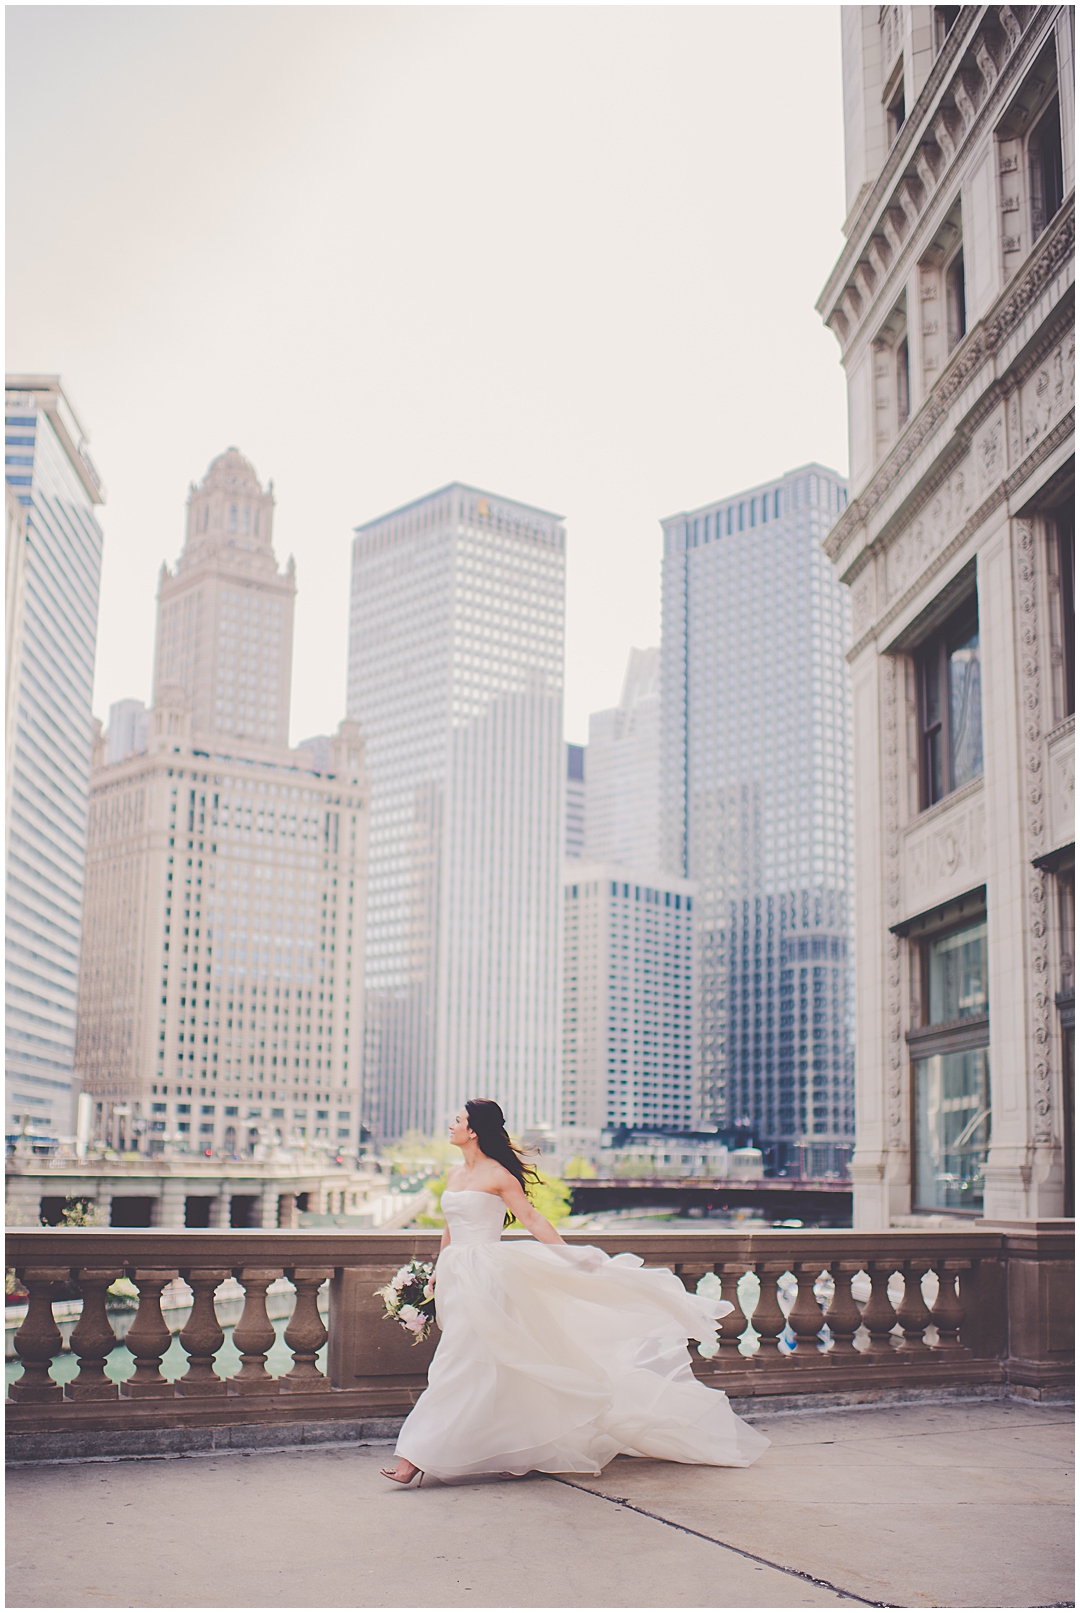 Wedding photos at the Wrigley Building Chicago - Romantic Blush & Gold Wedding Day at Room 1520 in Chicago, Illinois with Chicagoland Wedding Photographer Kara Evans Photographer